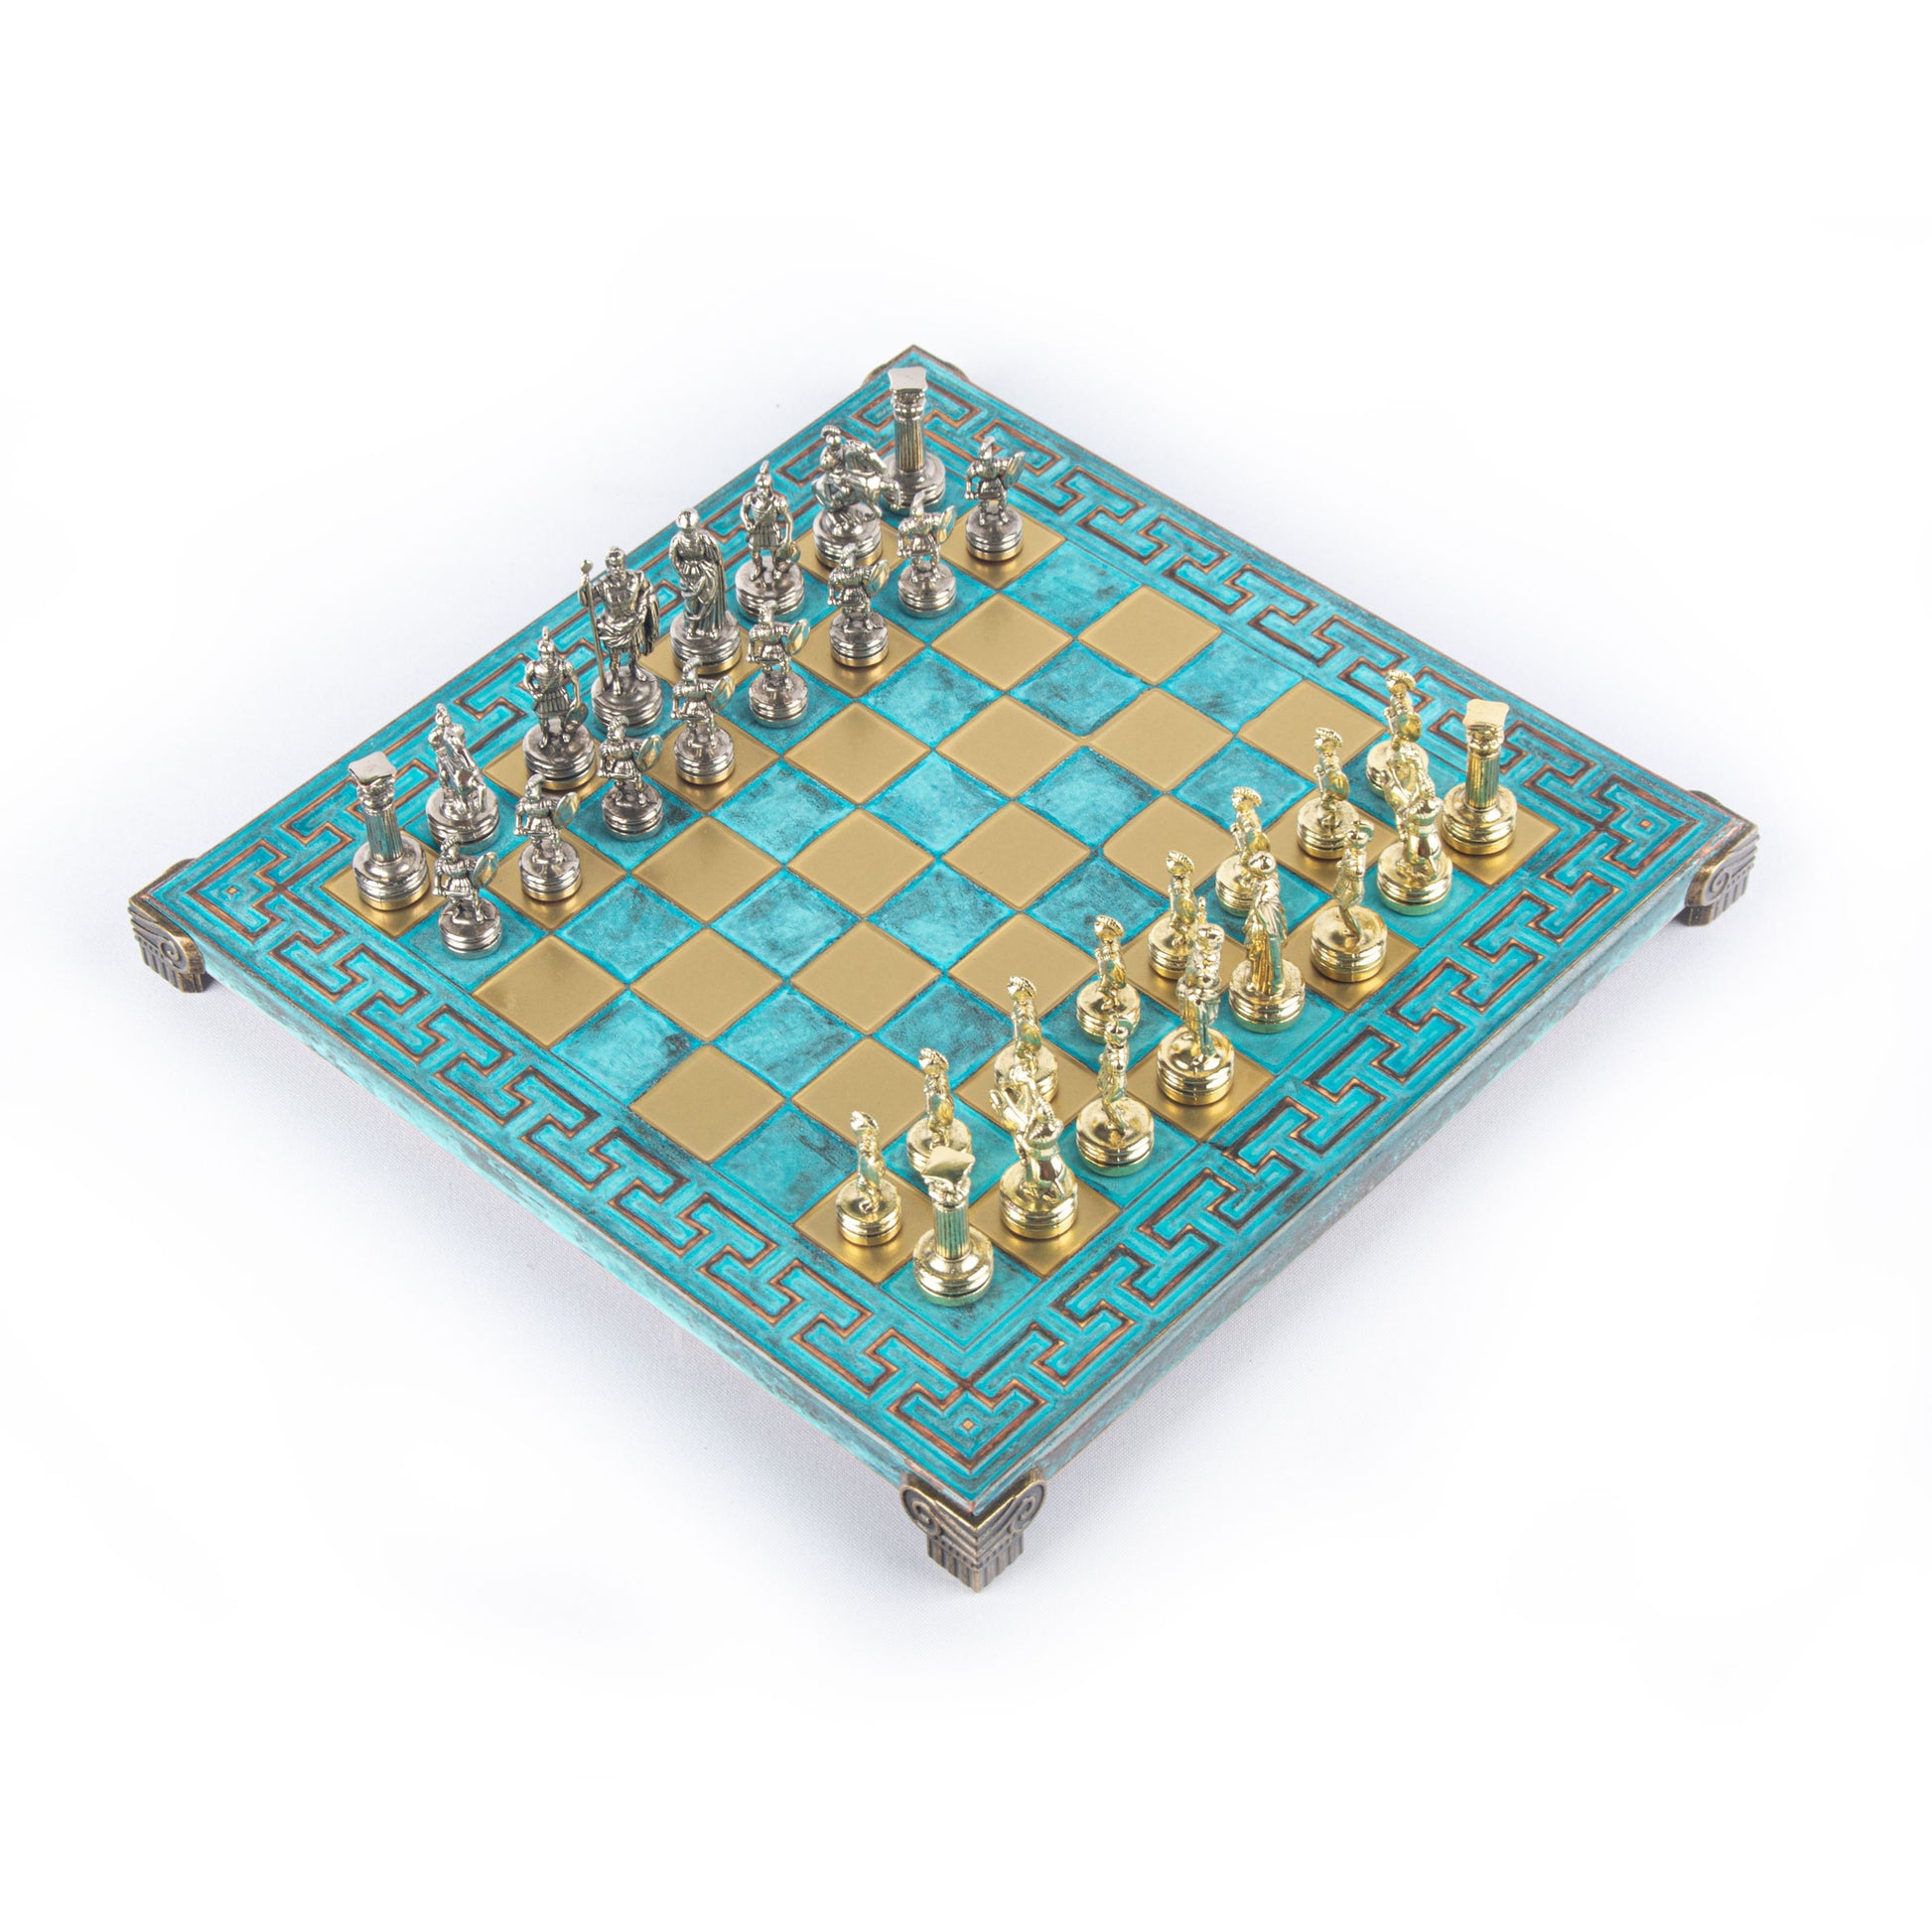 GREEK ROMAN PERIOD CHESS SET with gold/silver chessmen and meander bronze chessboard 28 x 28cm (Small) - Premium Chess from MANOPOULOS Chess & Backgammon - Just €138! Shop now at MANOPOULOS Chess & Backgammon